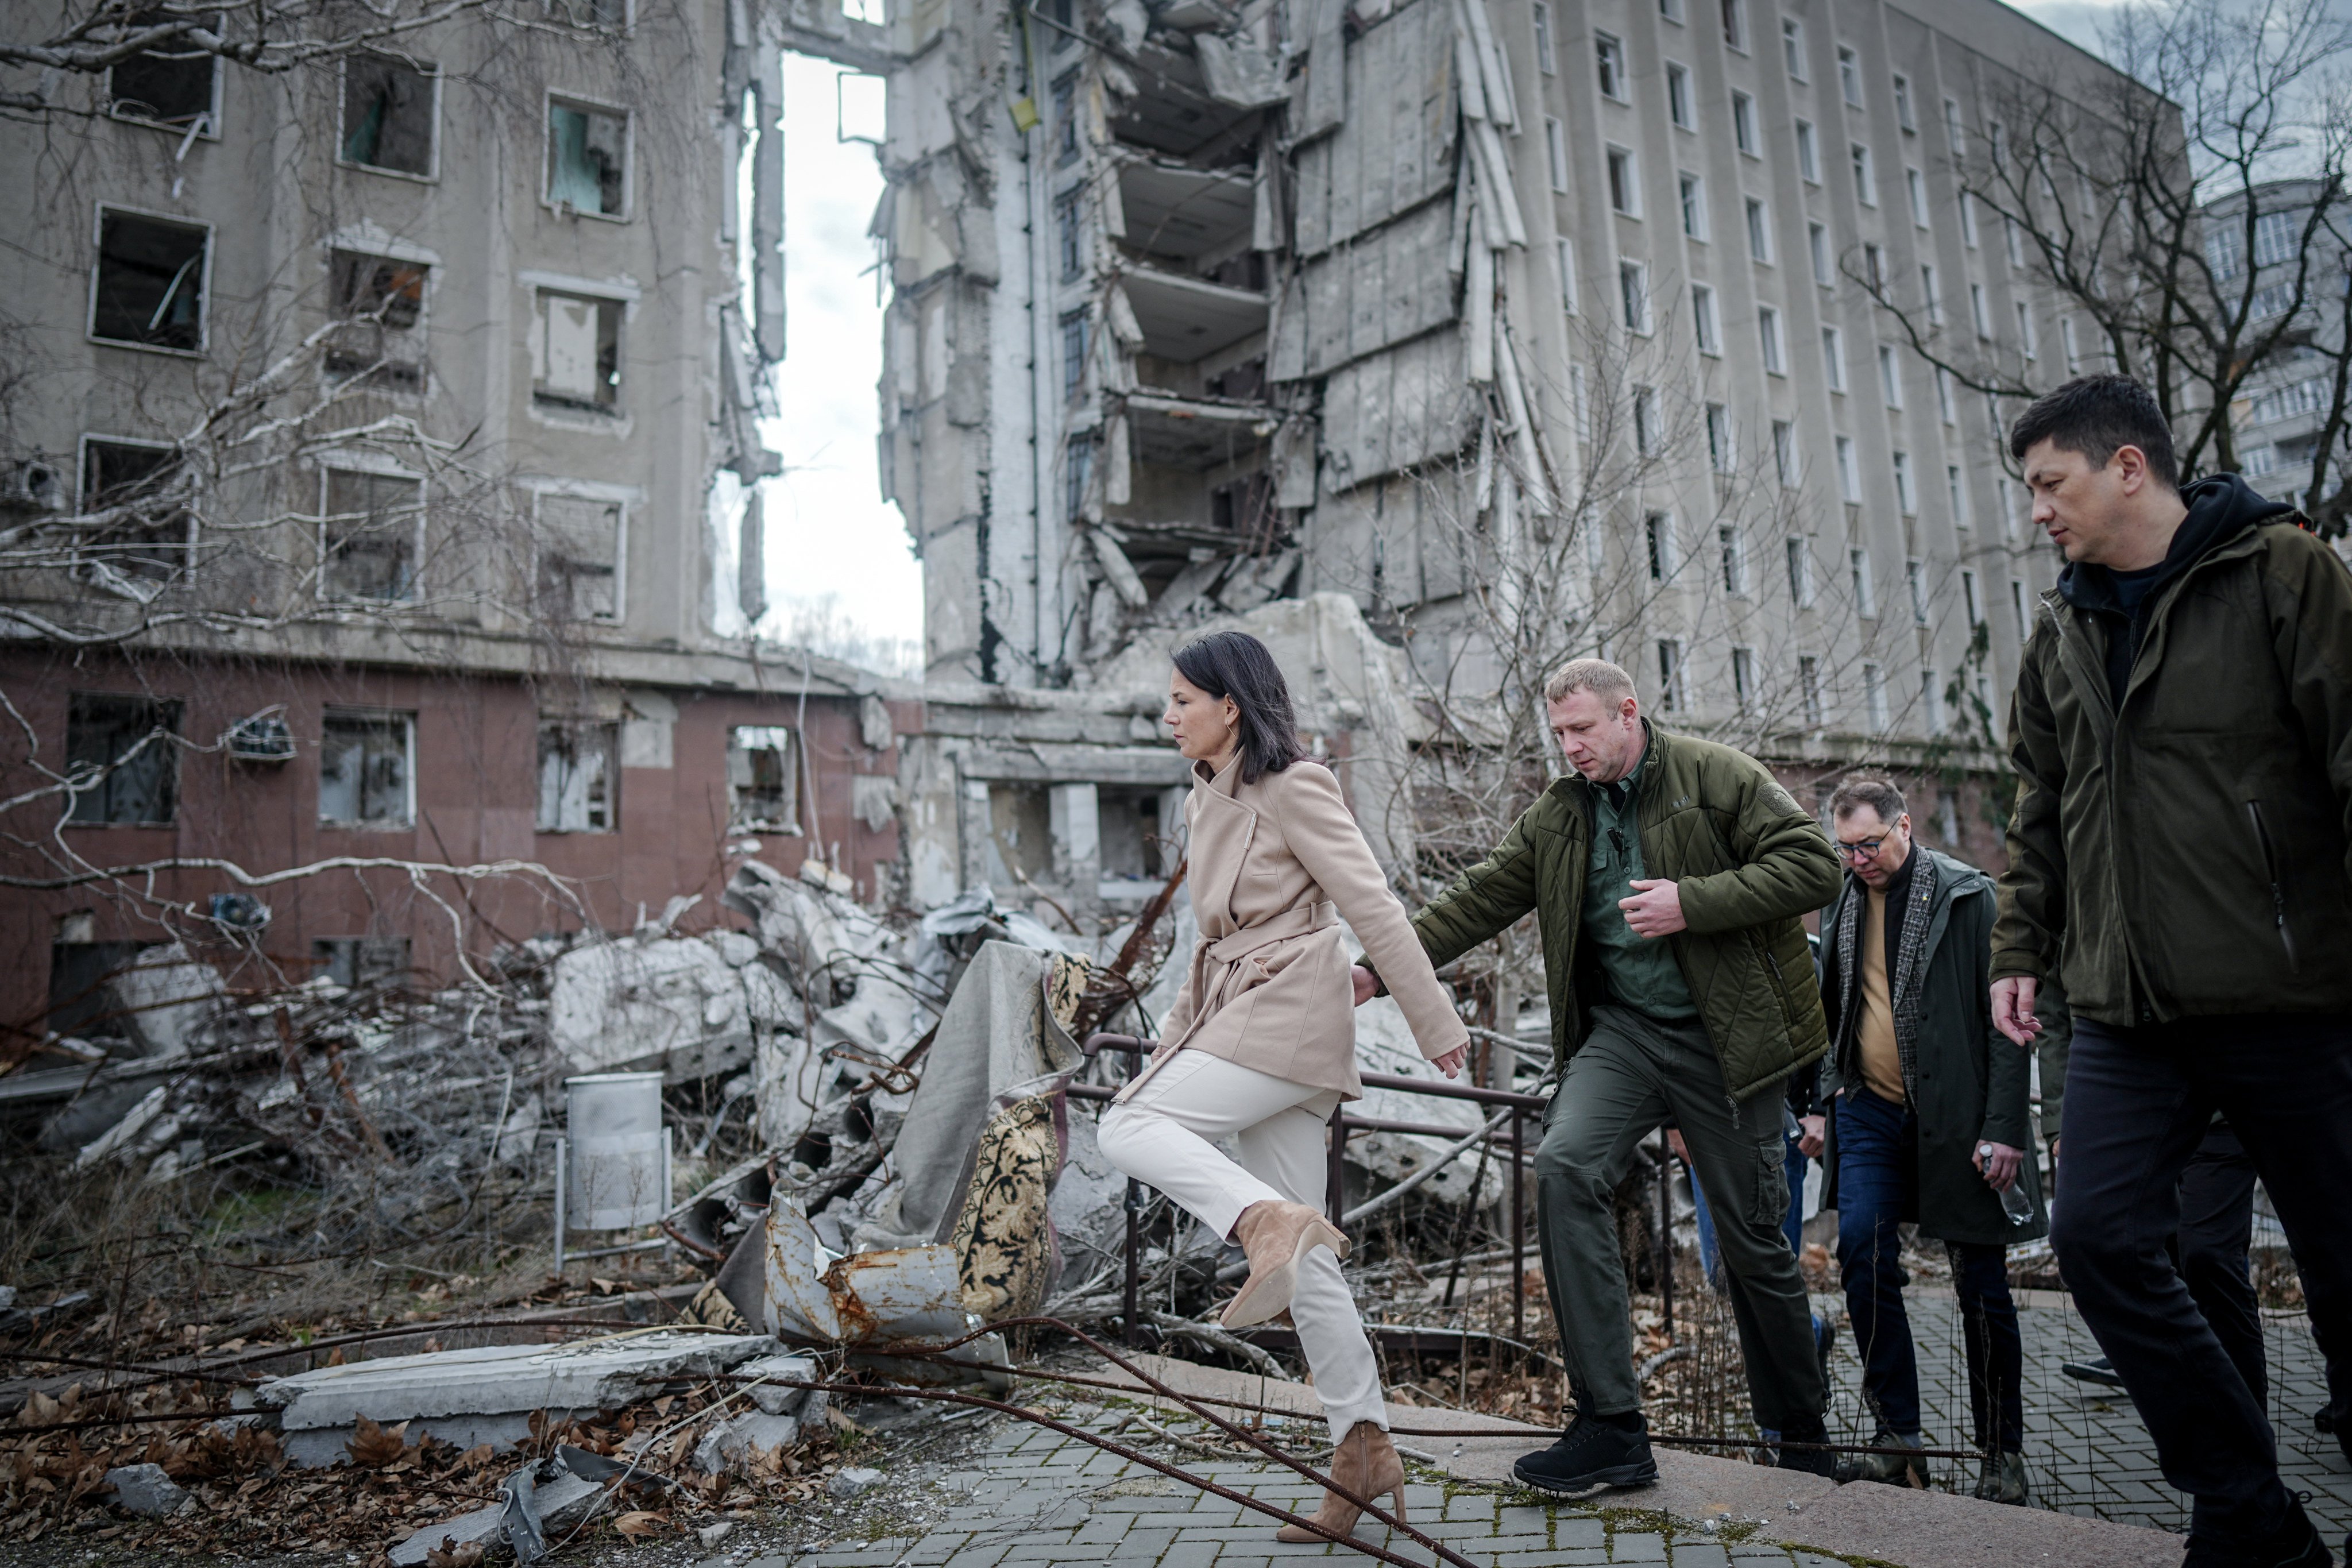 Germany’s Foreign Minister Annalena Baerbock visits the former headquarters of the regional administration of Mykolaiv Oblast on Sunday during her two-day visit to Ukraine. The building was hit by Russian missiles in March 2022 and almost completely destroyed. Photo: dpa